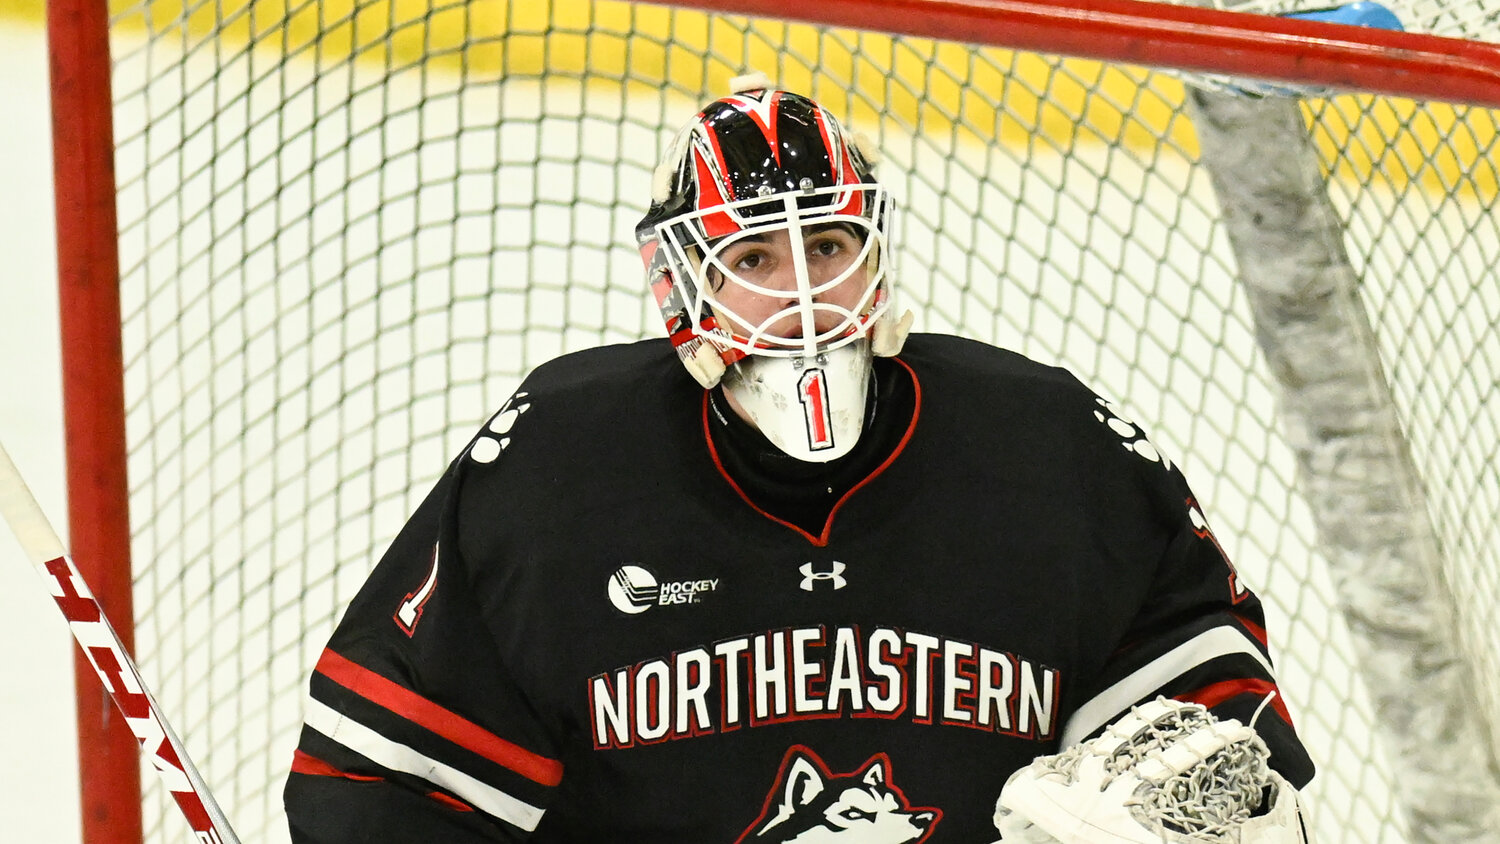 Northeastern goaltender Devon Levi appaears in a game against Union on Dec. 3, 2022, in Schenectady. The Sabres signed goalie Devon Levi to a three-year entry level contract on Friday, less than a week after the 21-year-old’s junior season ended at Northeastern University.